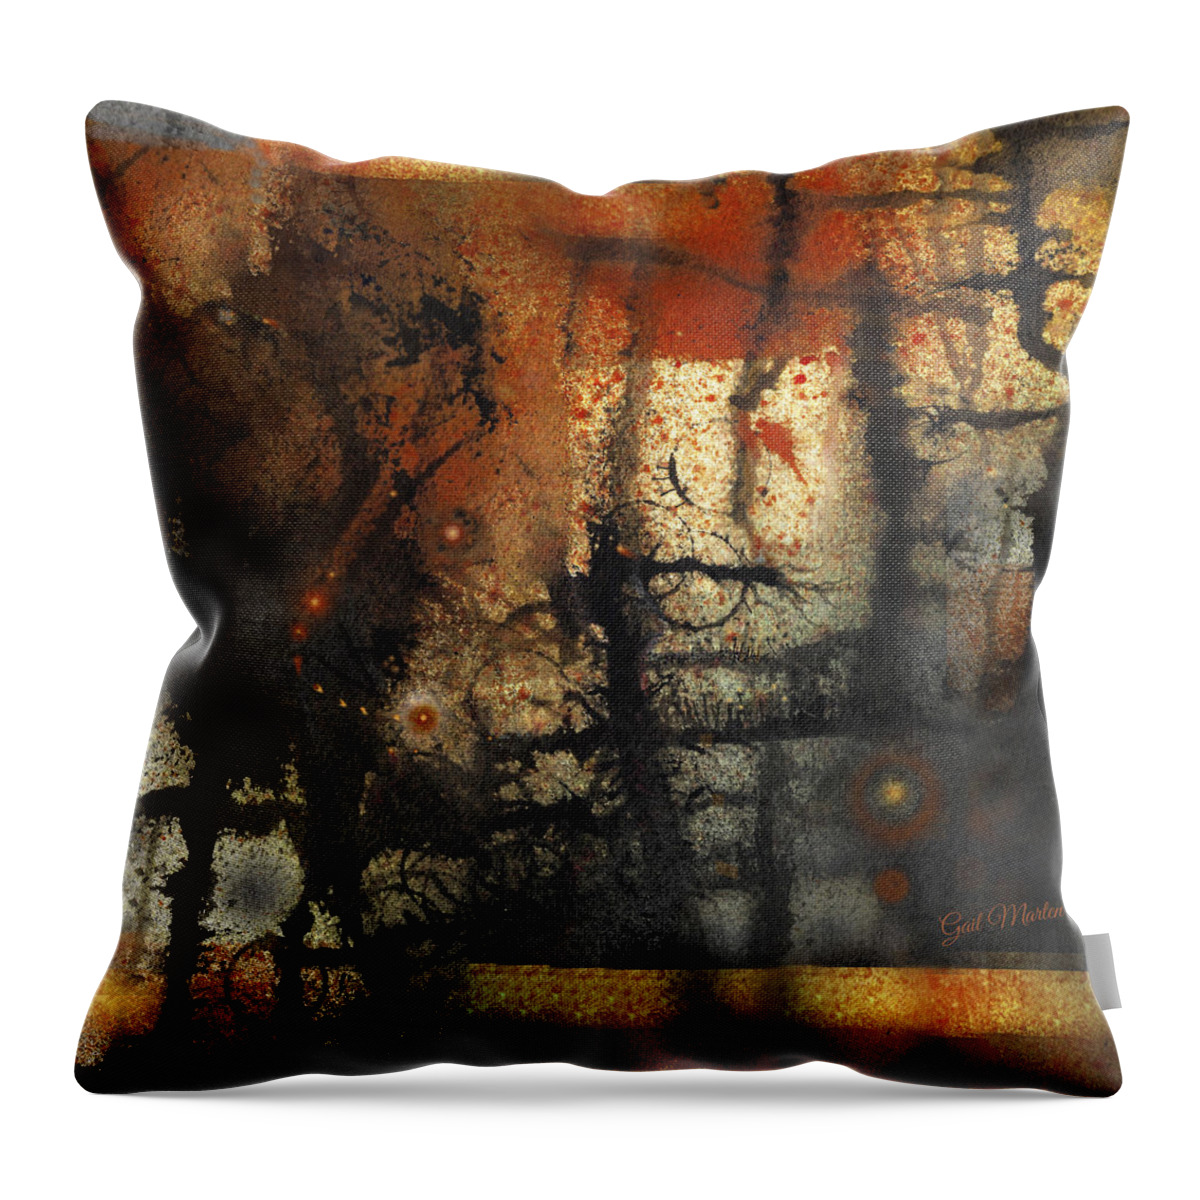 Abstract Throw Pillow featuring the painting Autumn Dream by Gail Marten